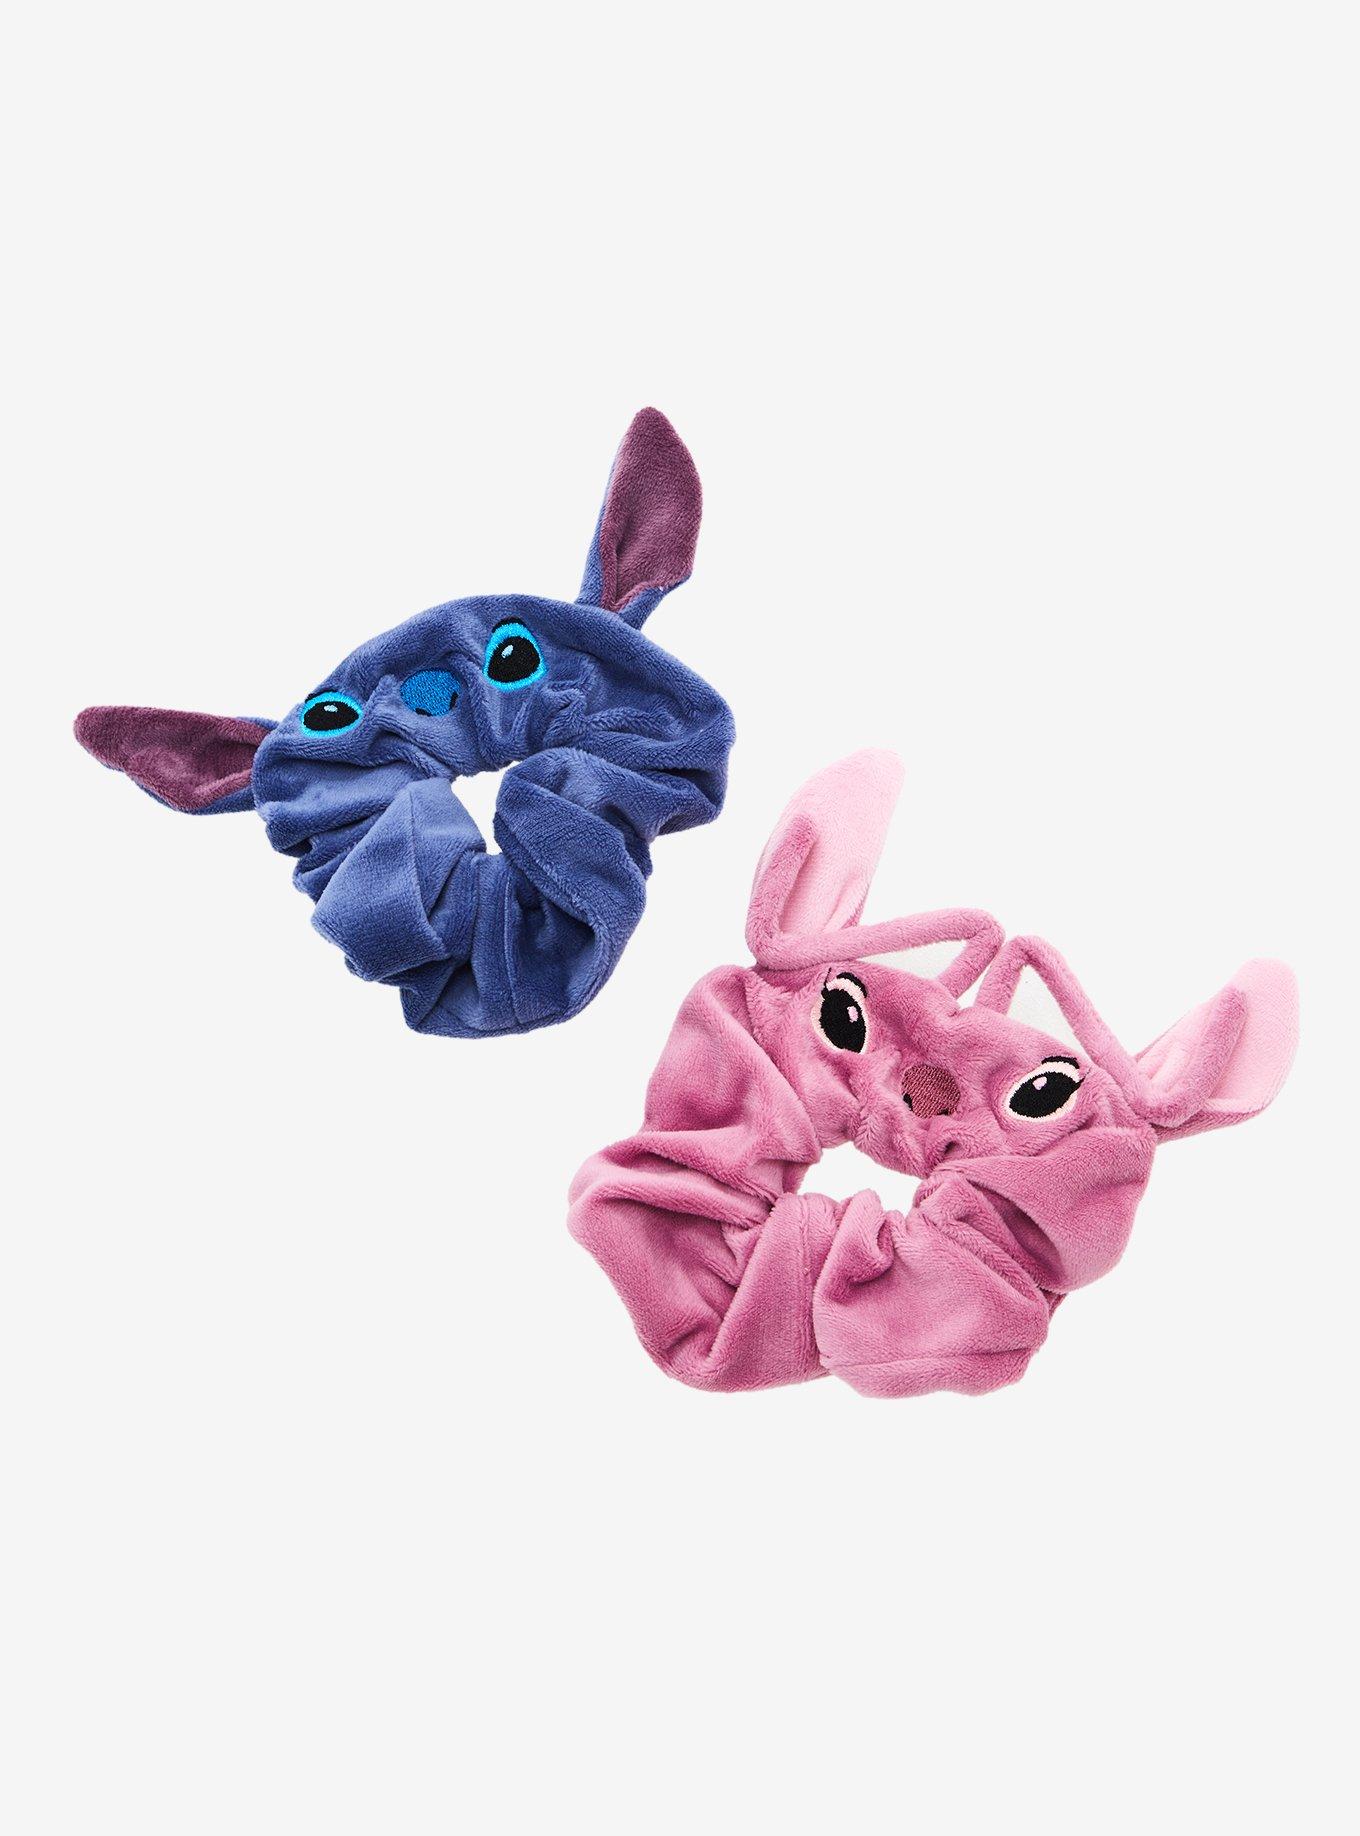  1 Pc Stitch Mouse Ears Headband & 2 Pcs Hair Bow Clips  Lilo  Stich Headbands & Hair Bow accessories Mouse Ear for Adults Women Girls  Kids Toddlers Halloween Birthday Christmas